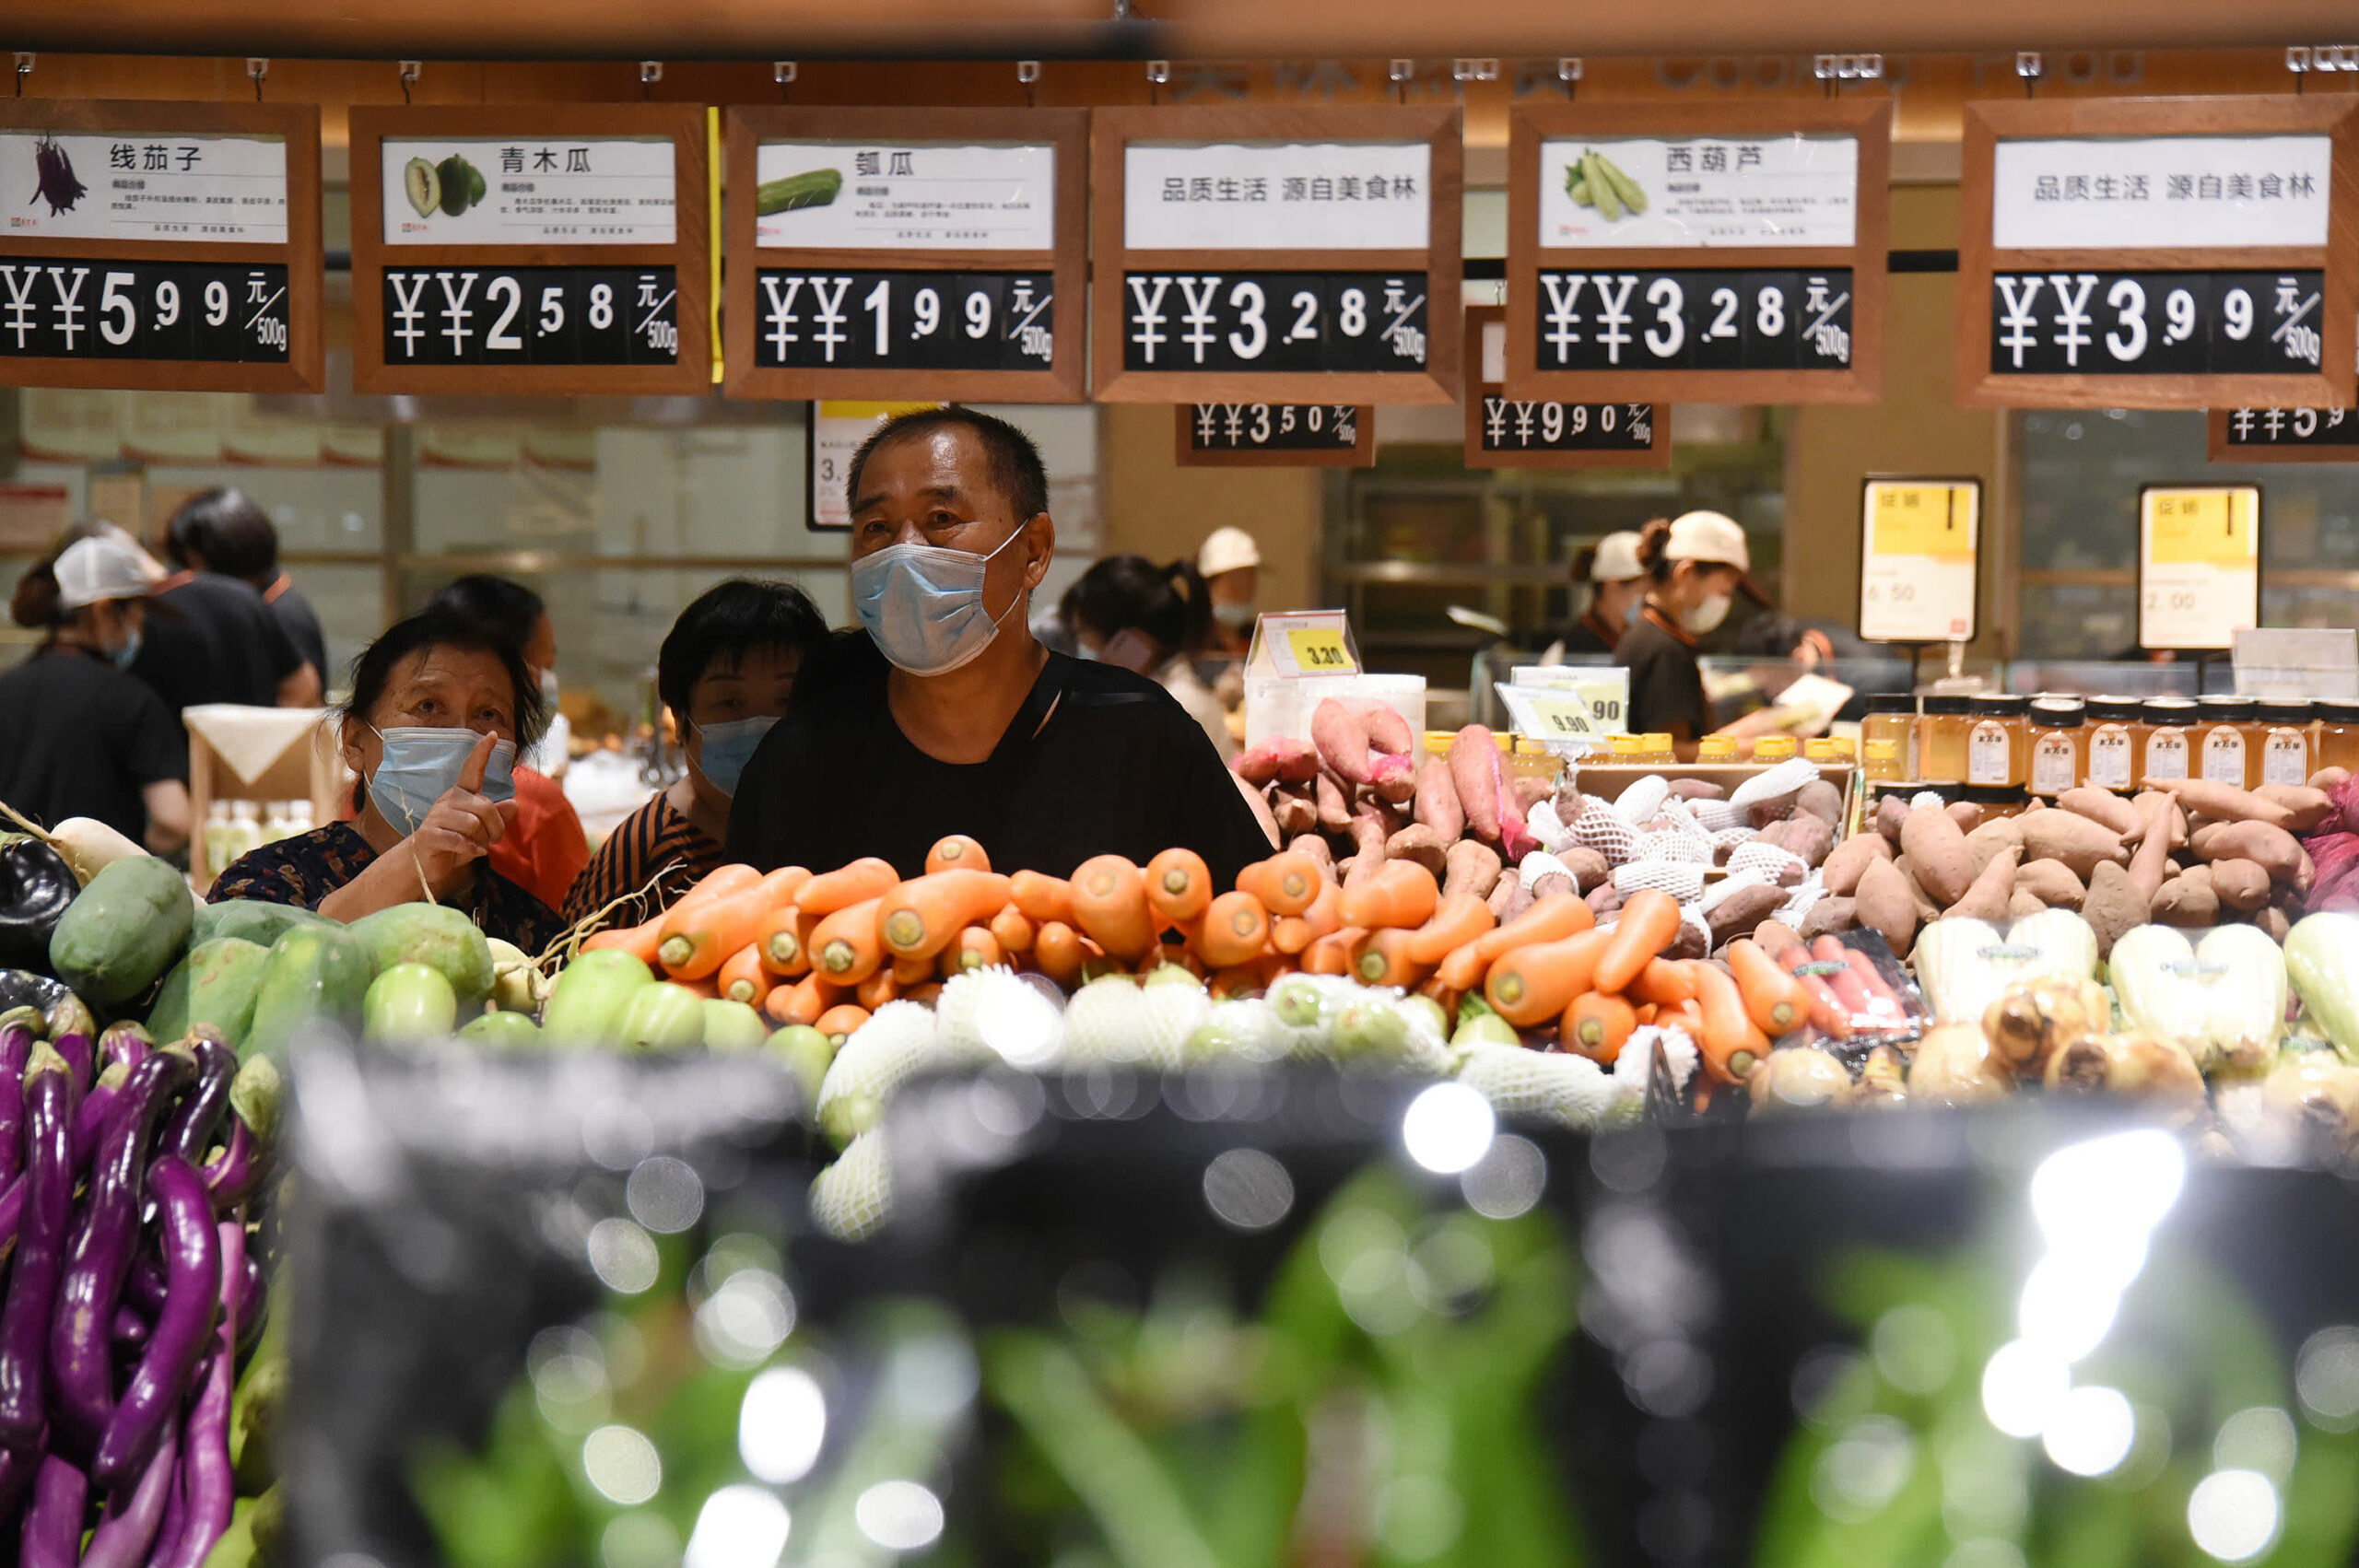 Asia’s food spending set to double to more than $8 trillion by 2030